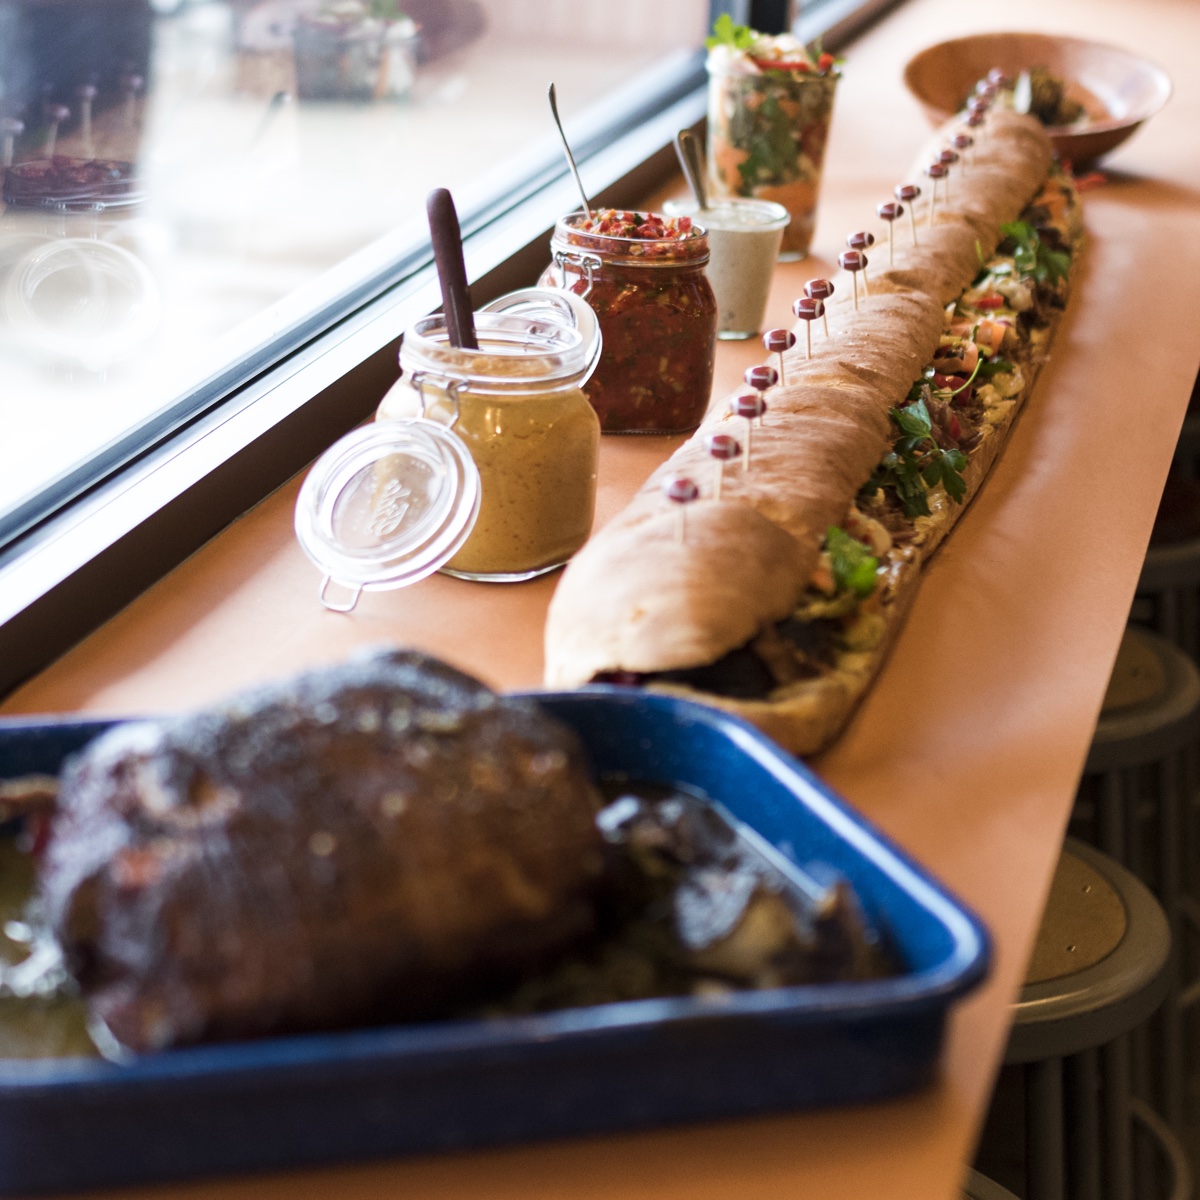 Roasted pork shoulder with fennel and broccoli rabe, Sweet Cheeks condiments, and a 5-Foot Pork Bomb